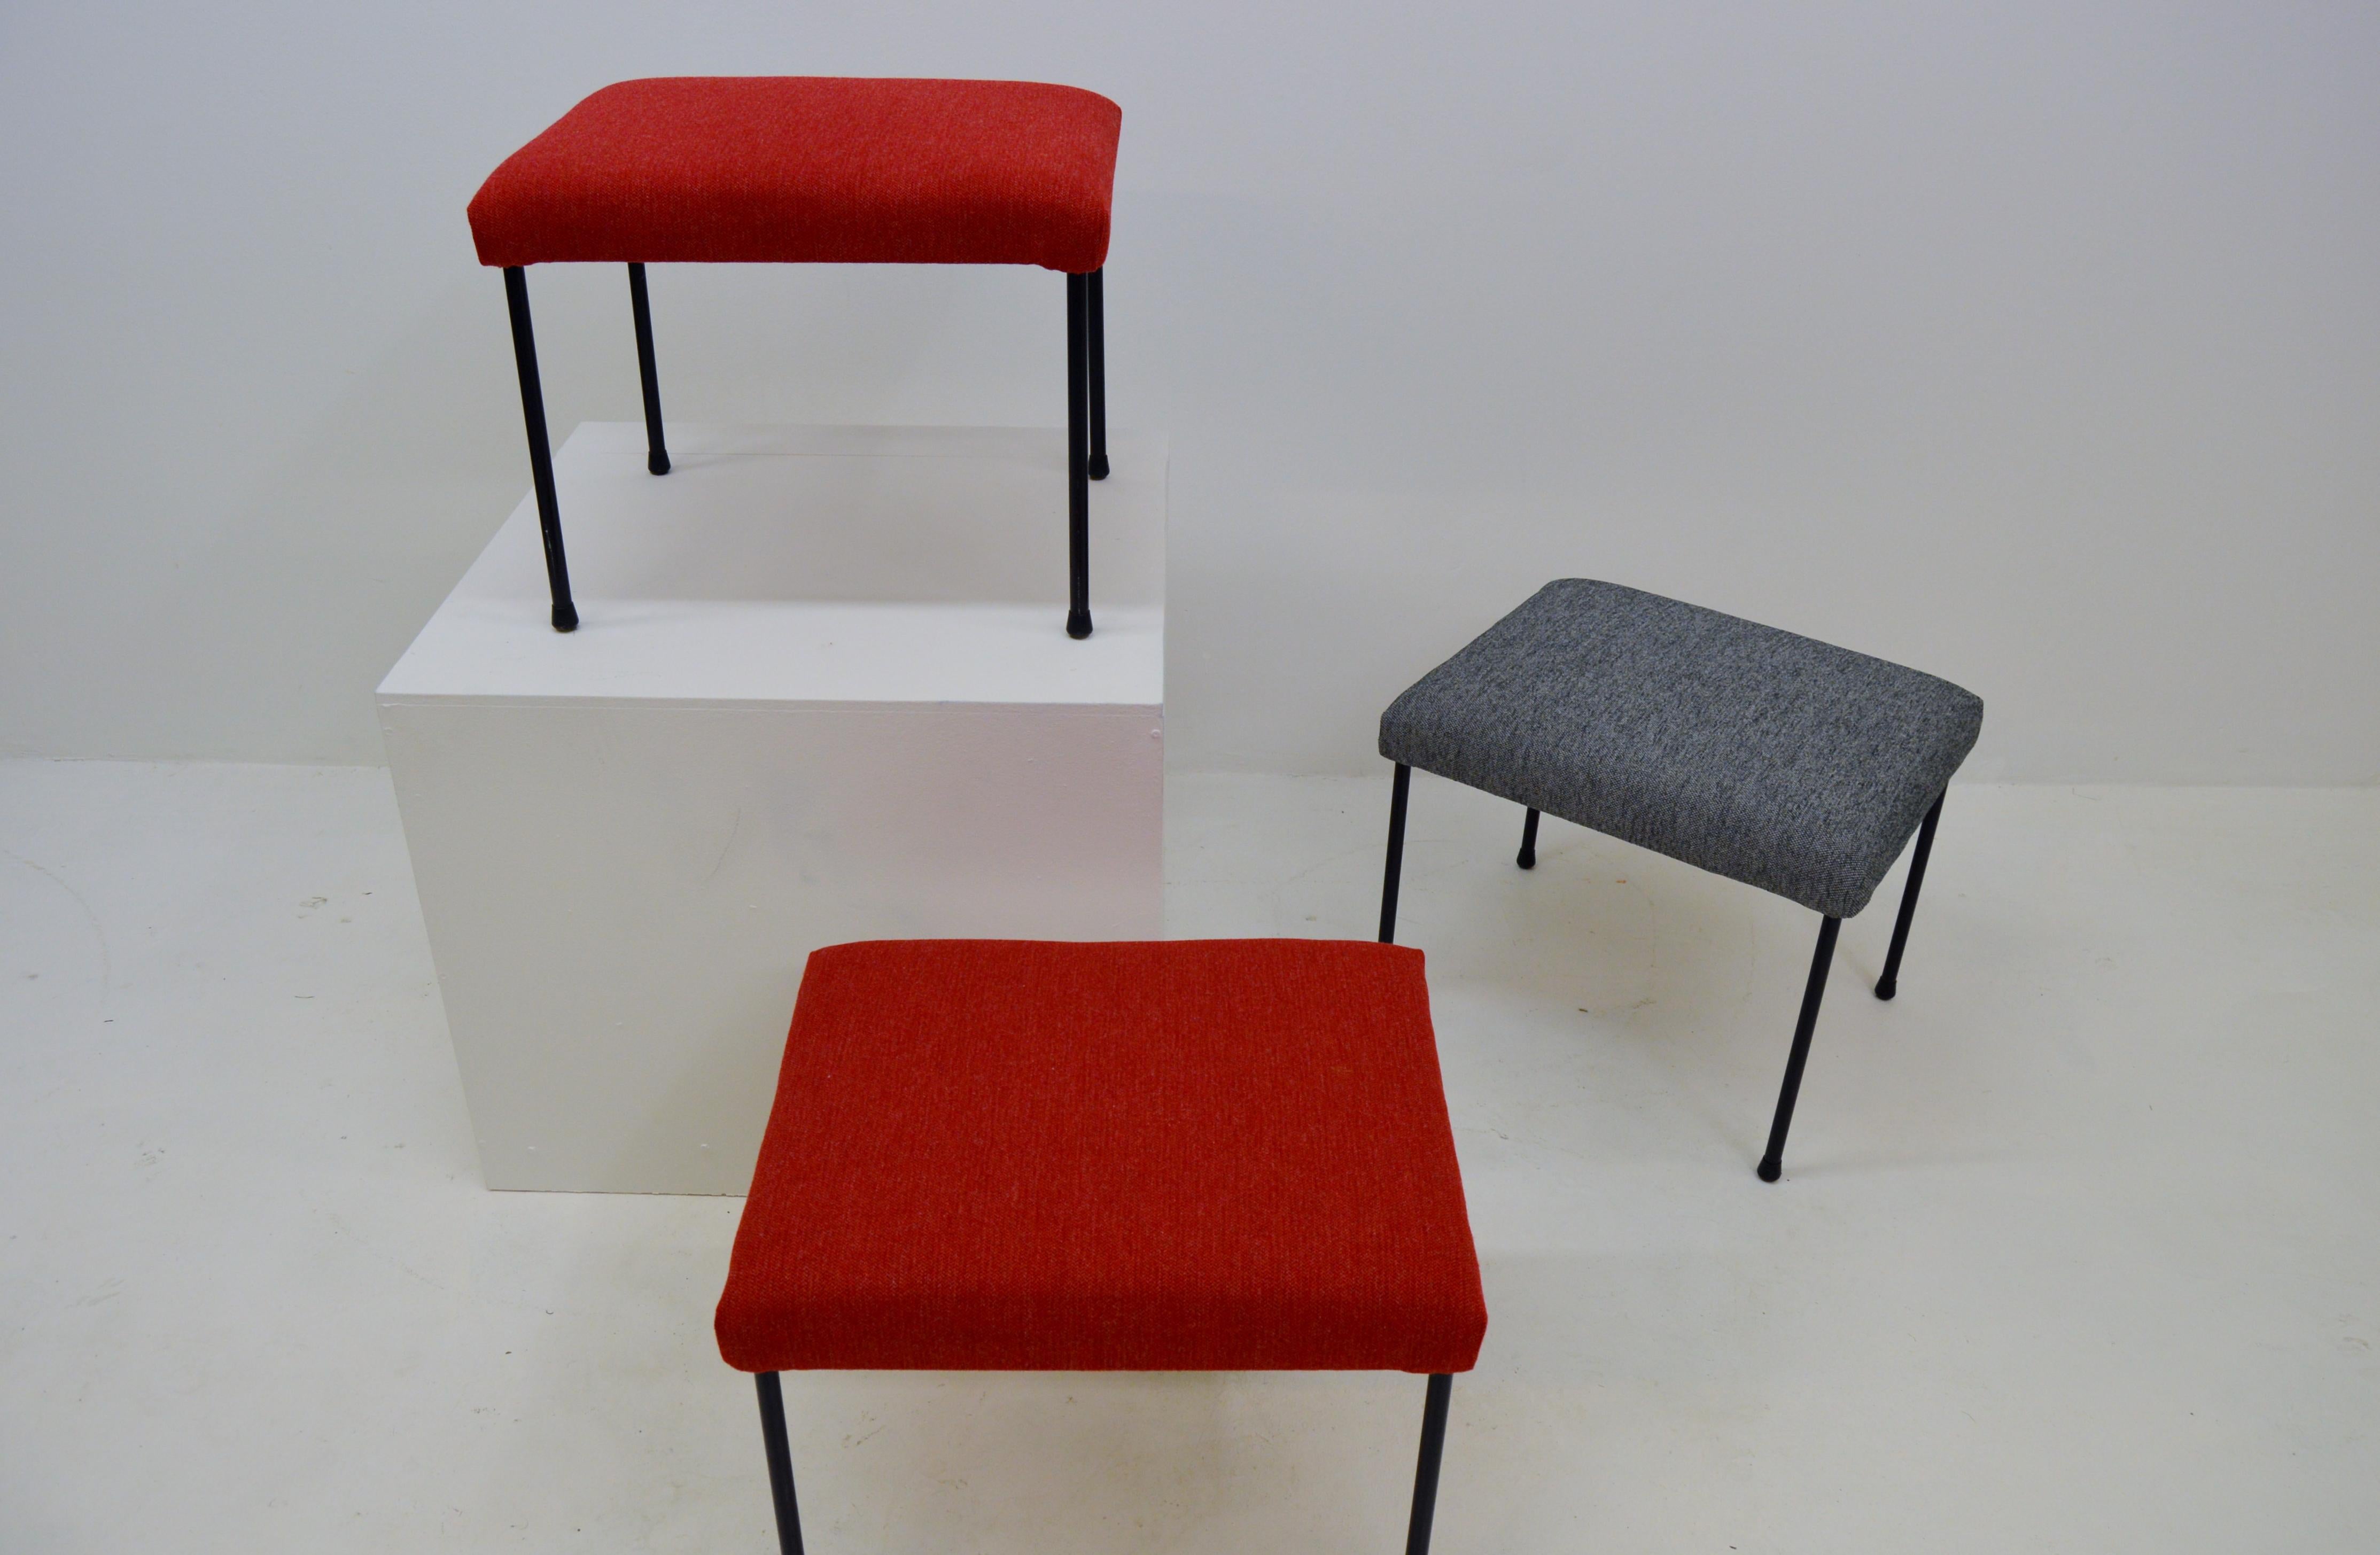 Set of three footstools / ottomans. They can be used individually or form a bench. The stools are newly upholstered in quality fabric. The legs are made of metal and the seat has fabrics, foam and webbing. Midcentury, designed and produced in Sweden